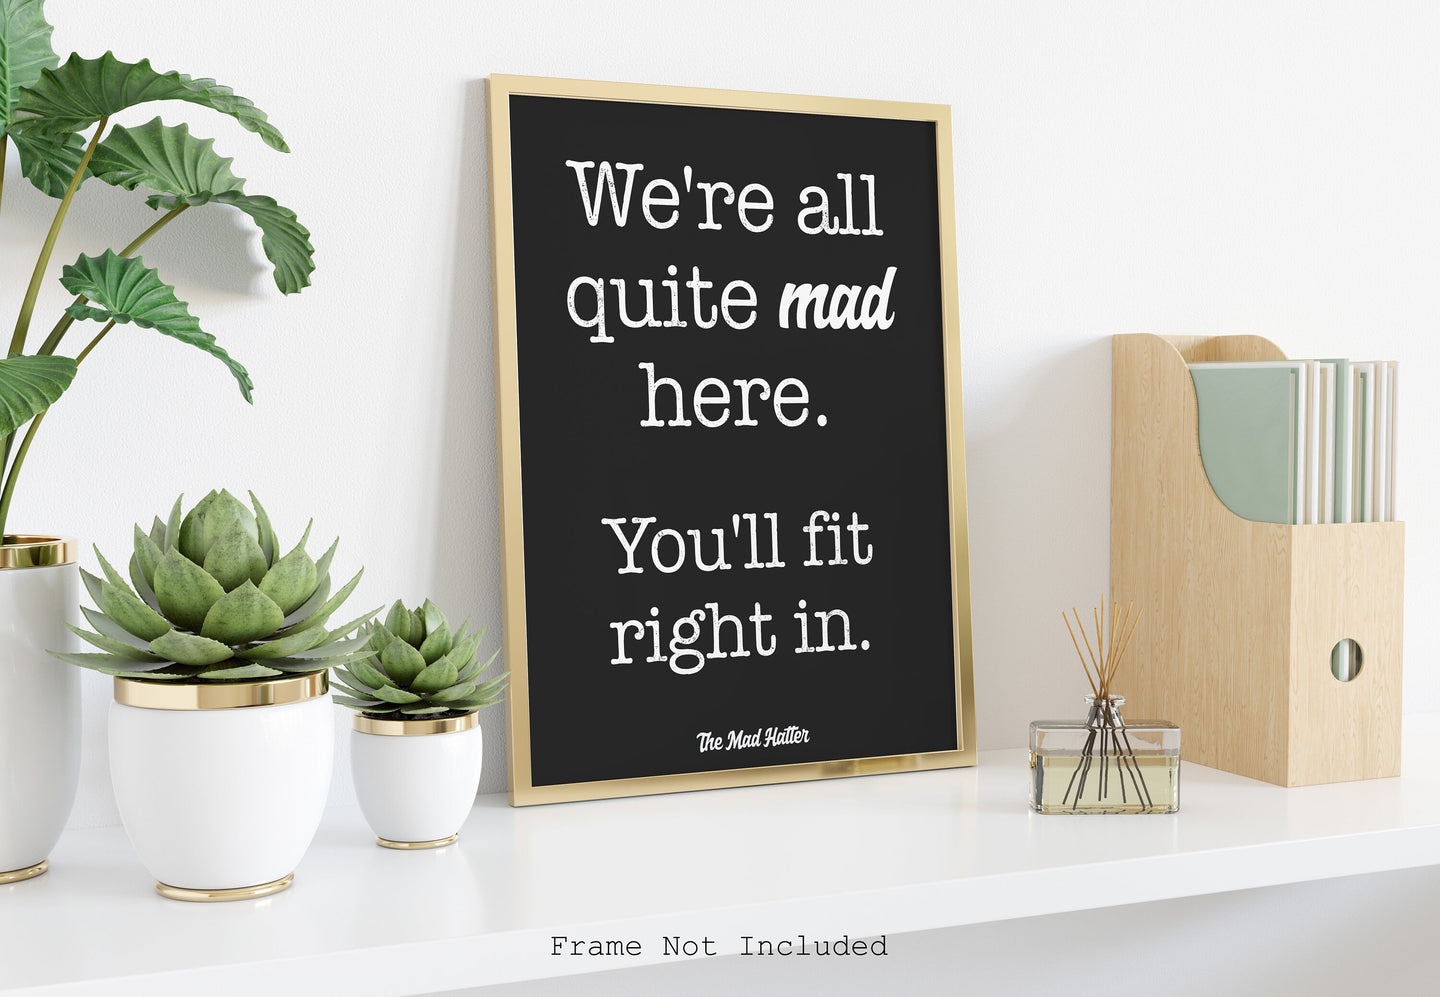 Alice in wonderland Quote Lewis Carroll - We're all quite mad here you'll fit right in - Mad hatter quote book lover Print